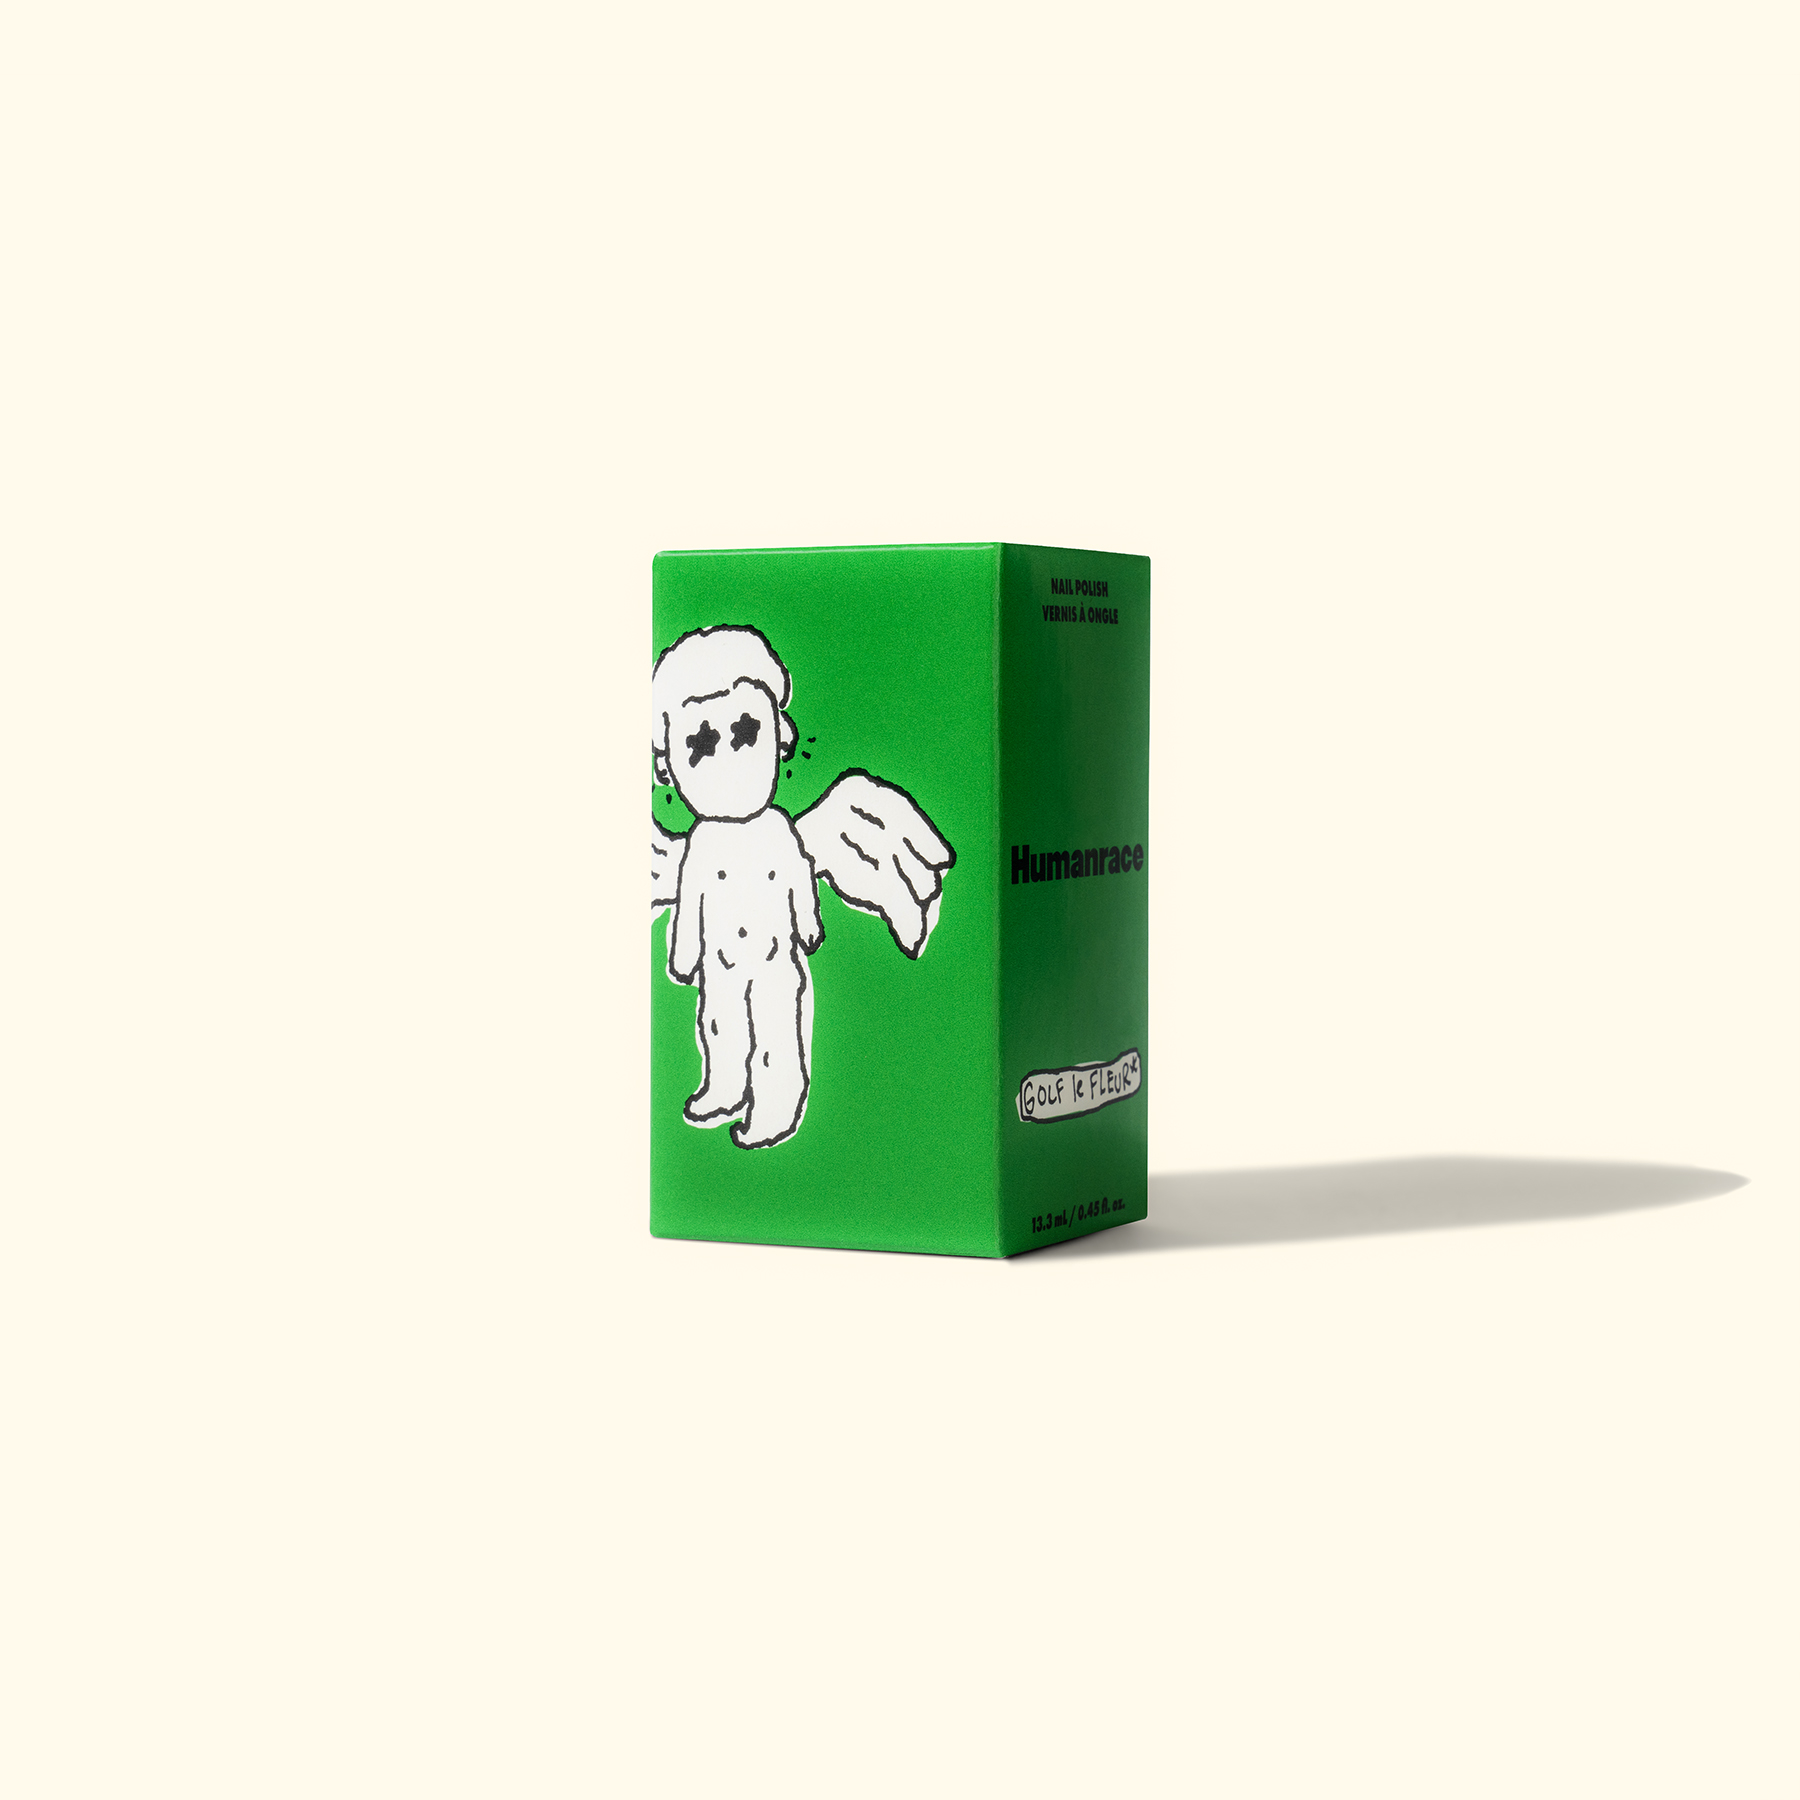 A green shoebox with an illustrated character on the side, part of the Humanrace collaboration